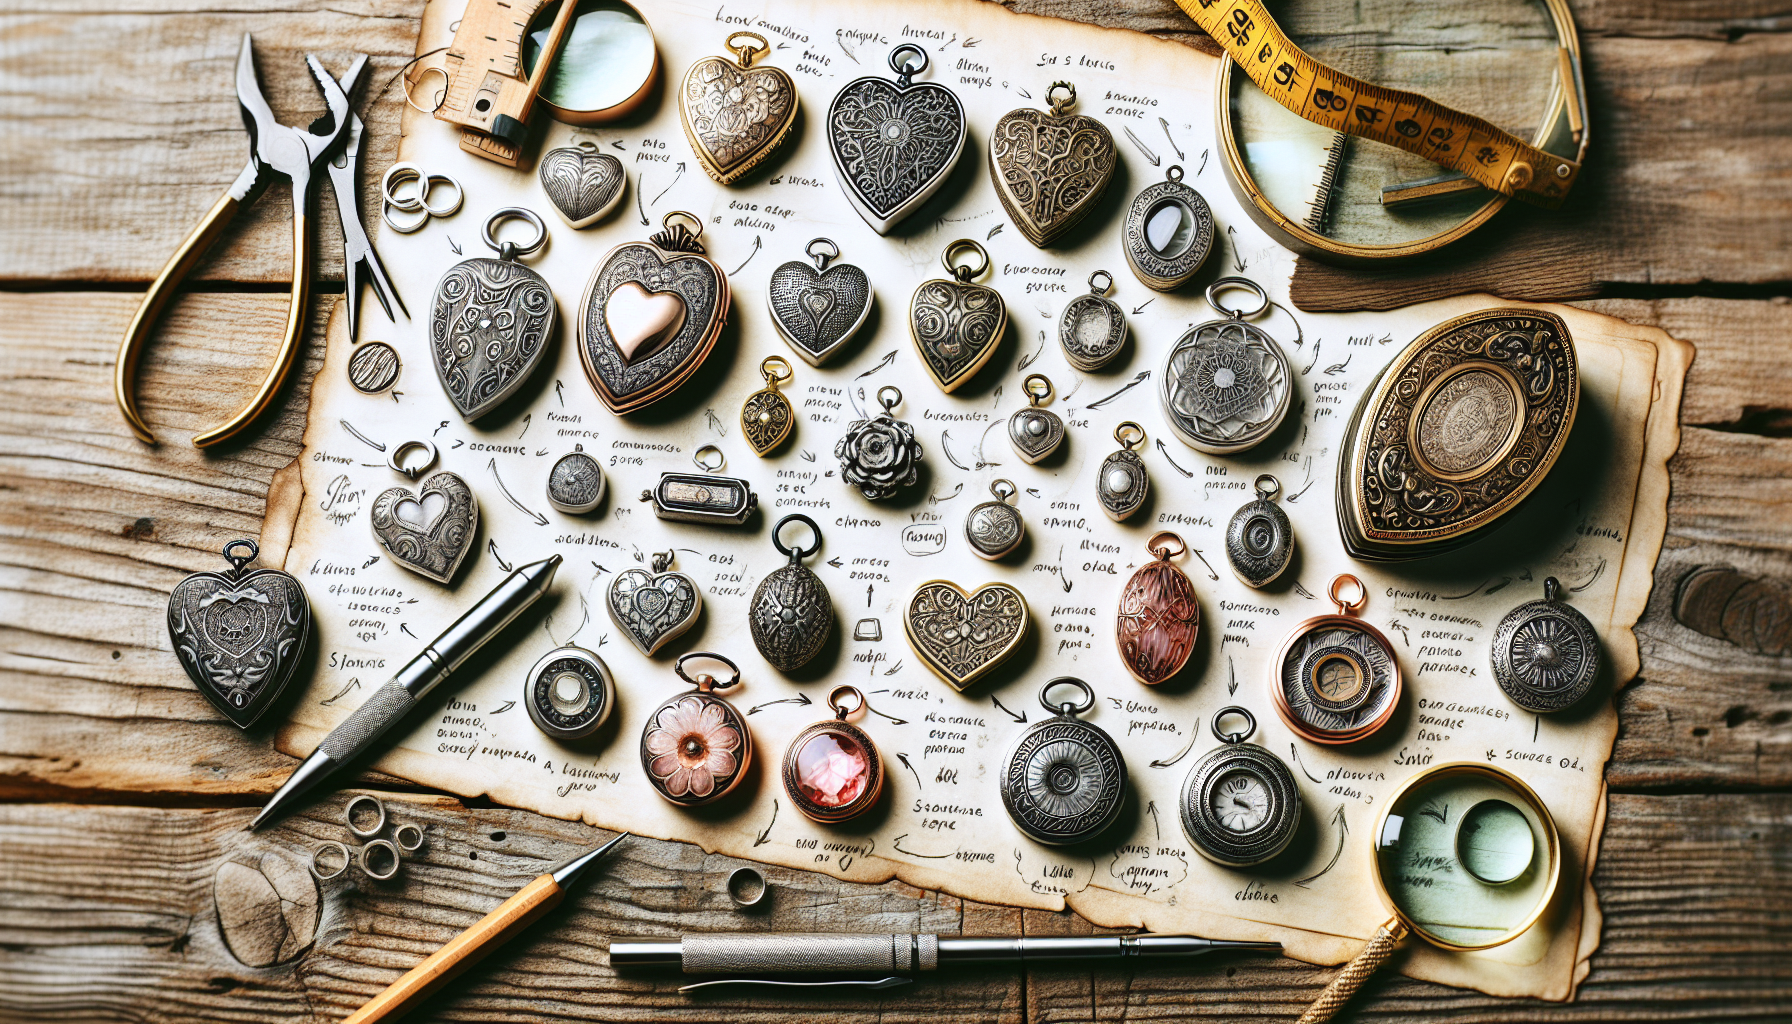 An intricate guide to choosing lockets for crafting jewelry. The image features a variety of lockets spread out on an antique wooden table, each with different shapes such as hearts, ovals, and square